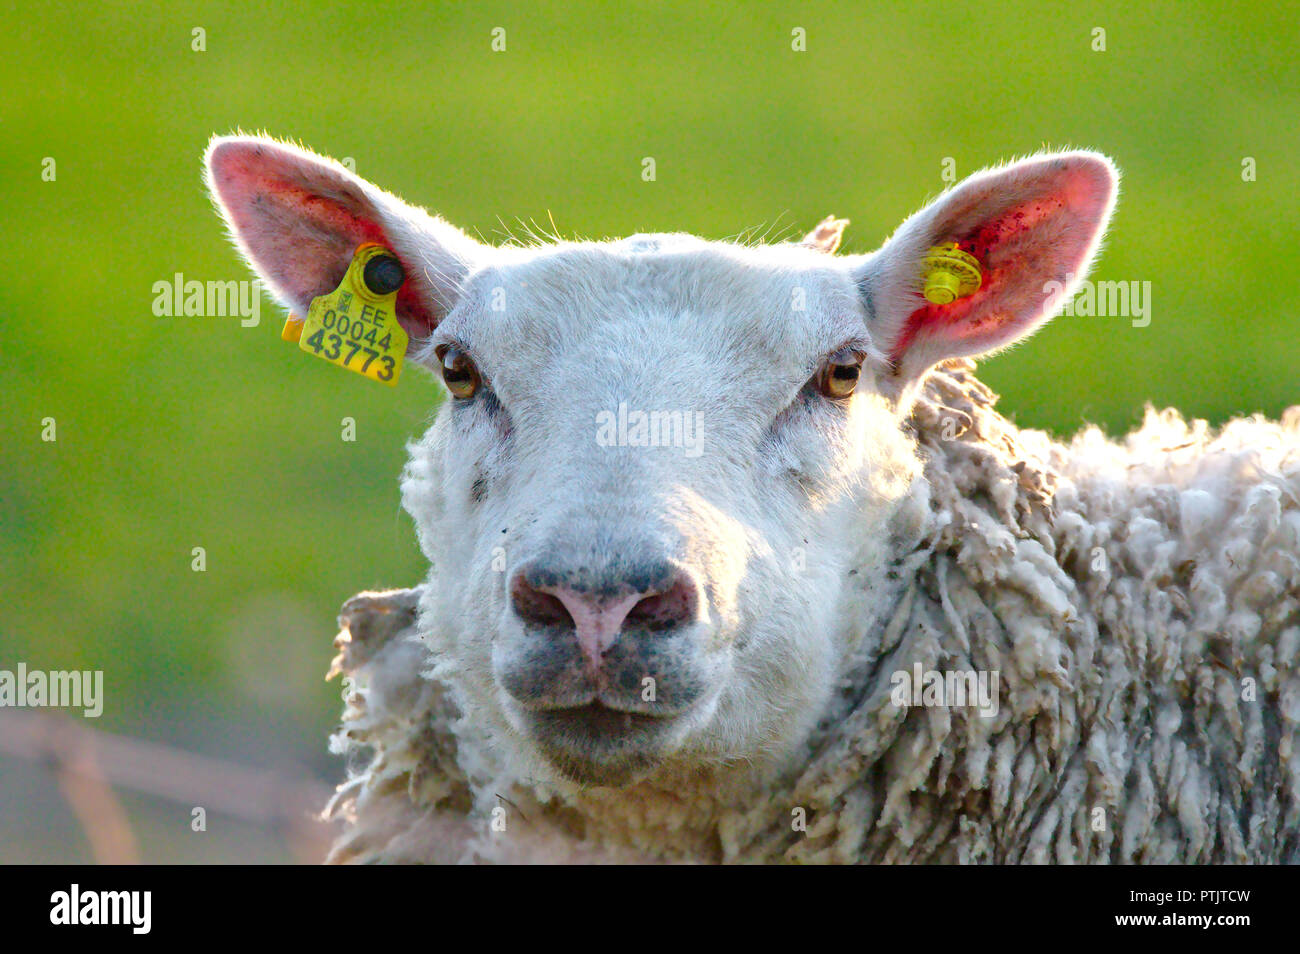 A sheep closeup portrait. Sheep with big pink ears looking straight into the camera. Green grass on blurred background. Stock Photo